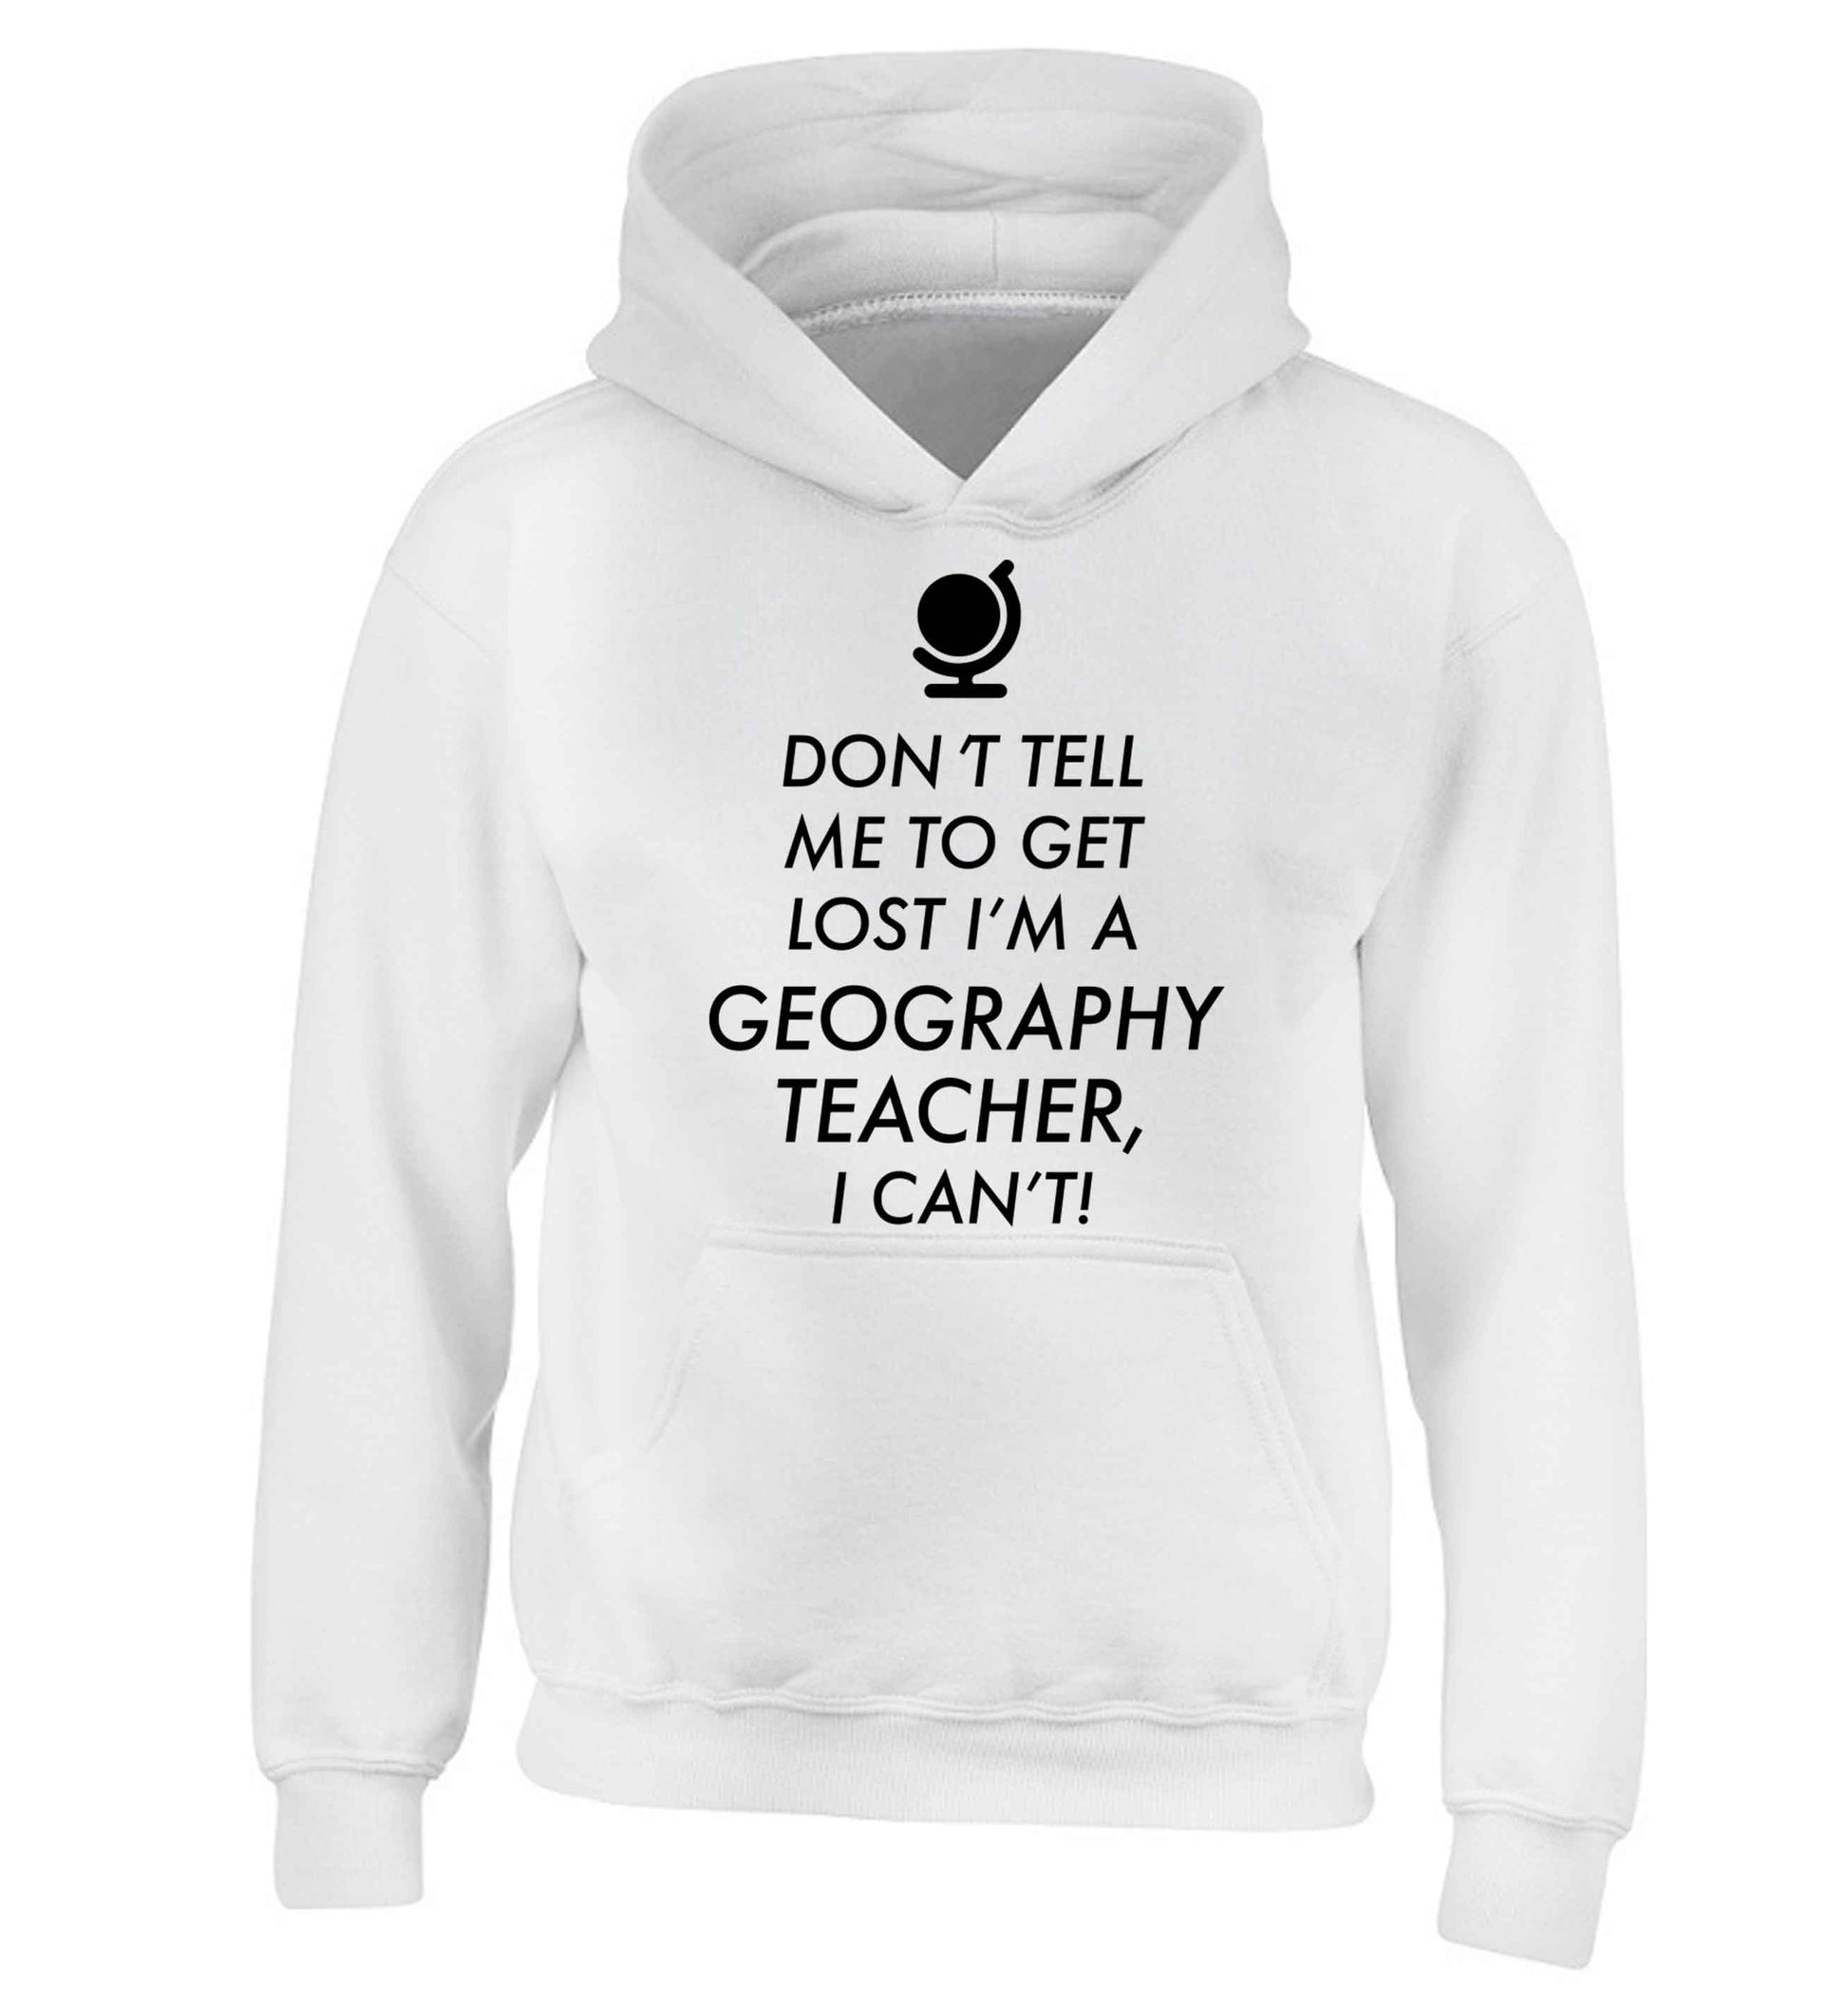 Don't tell me to get lost I'm a geography teacher, I can't children's white hoodie 12-13 Years